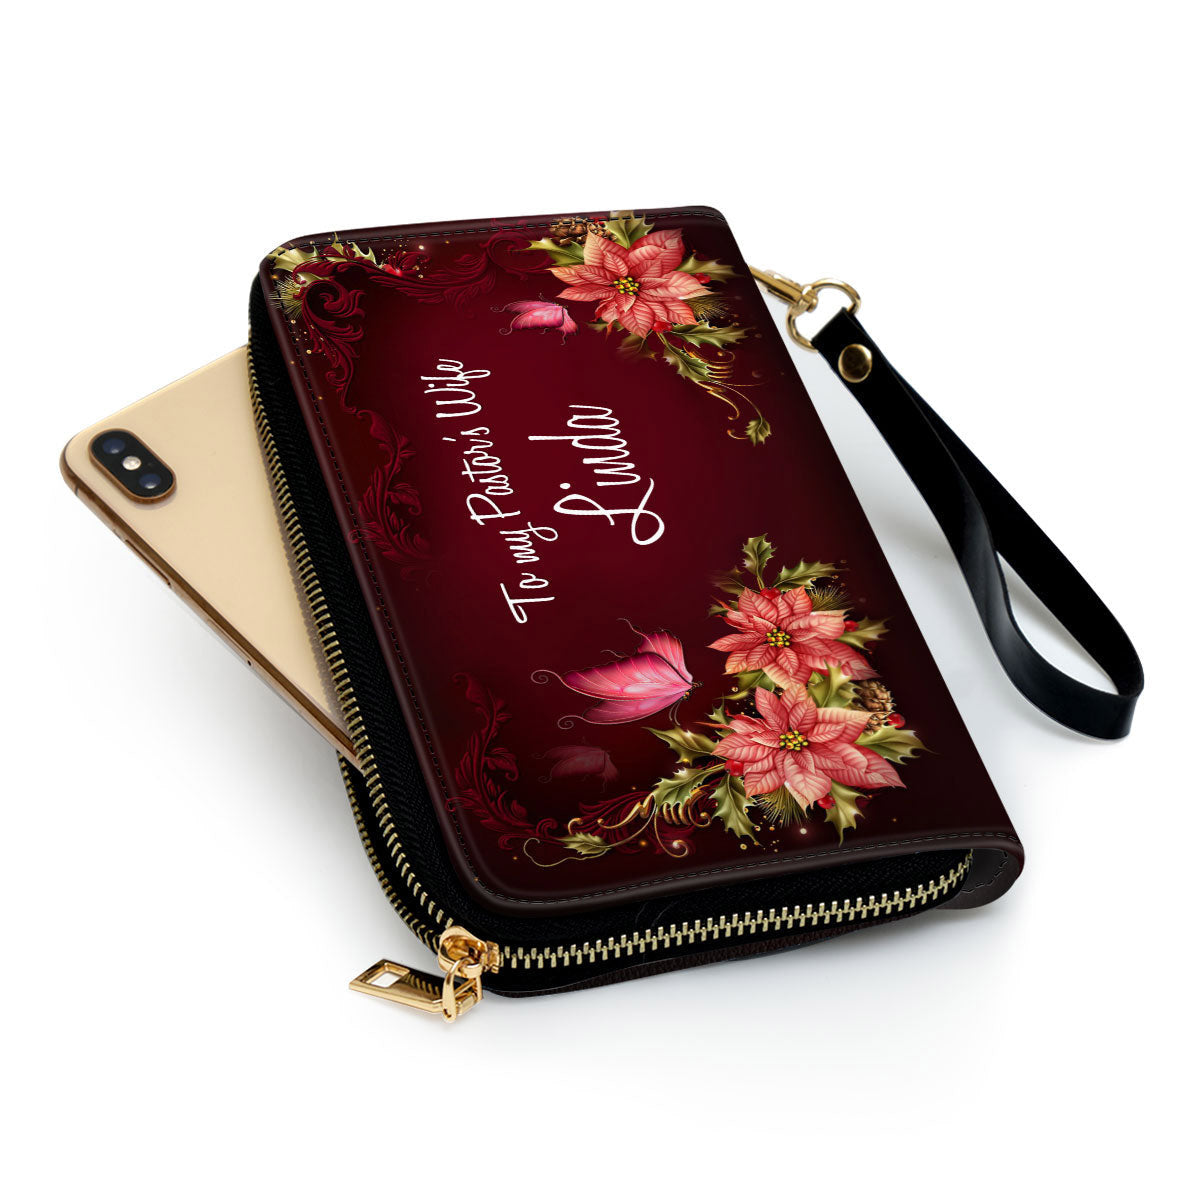 A Woman With A Heart That Cares Gift For Pastors's Wife Butterfly And Flower Clutch Purse For Women - Personalized Name - Christian Gifts For Women